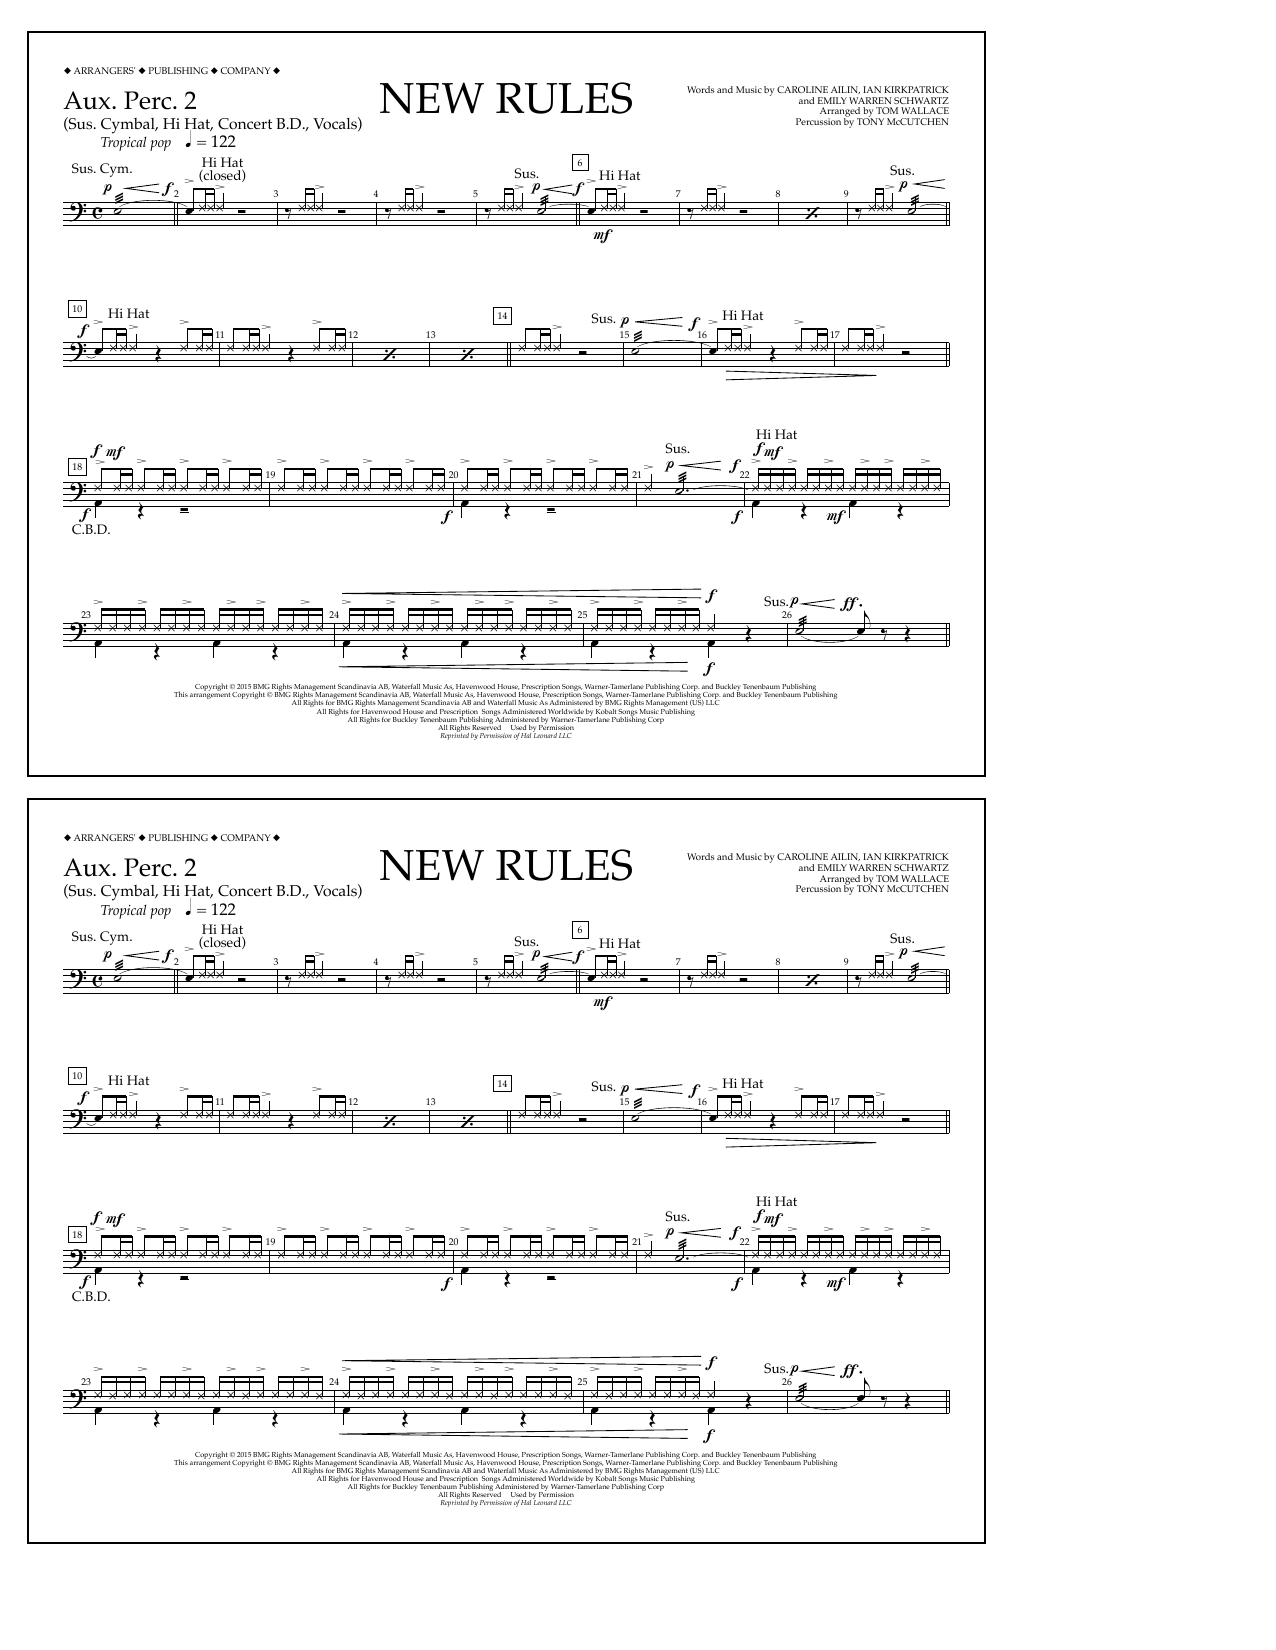 Download Tom Wallace New Rules - Aux. Perc. 2 Sheet Music